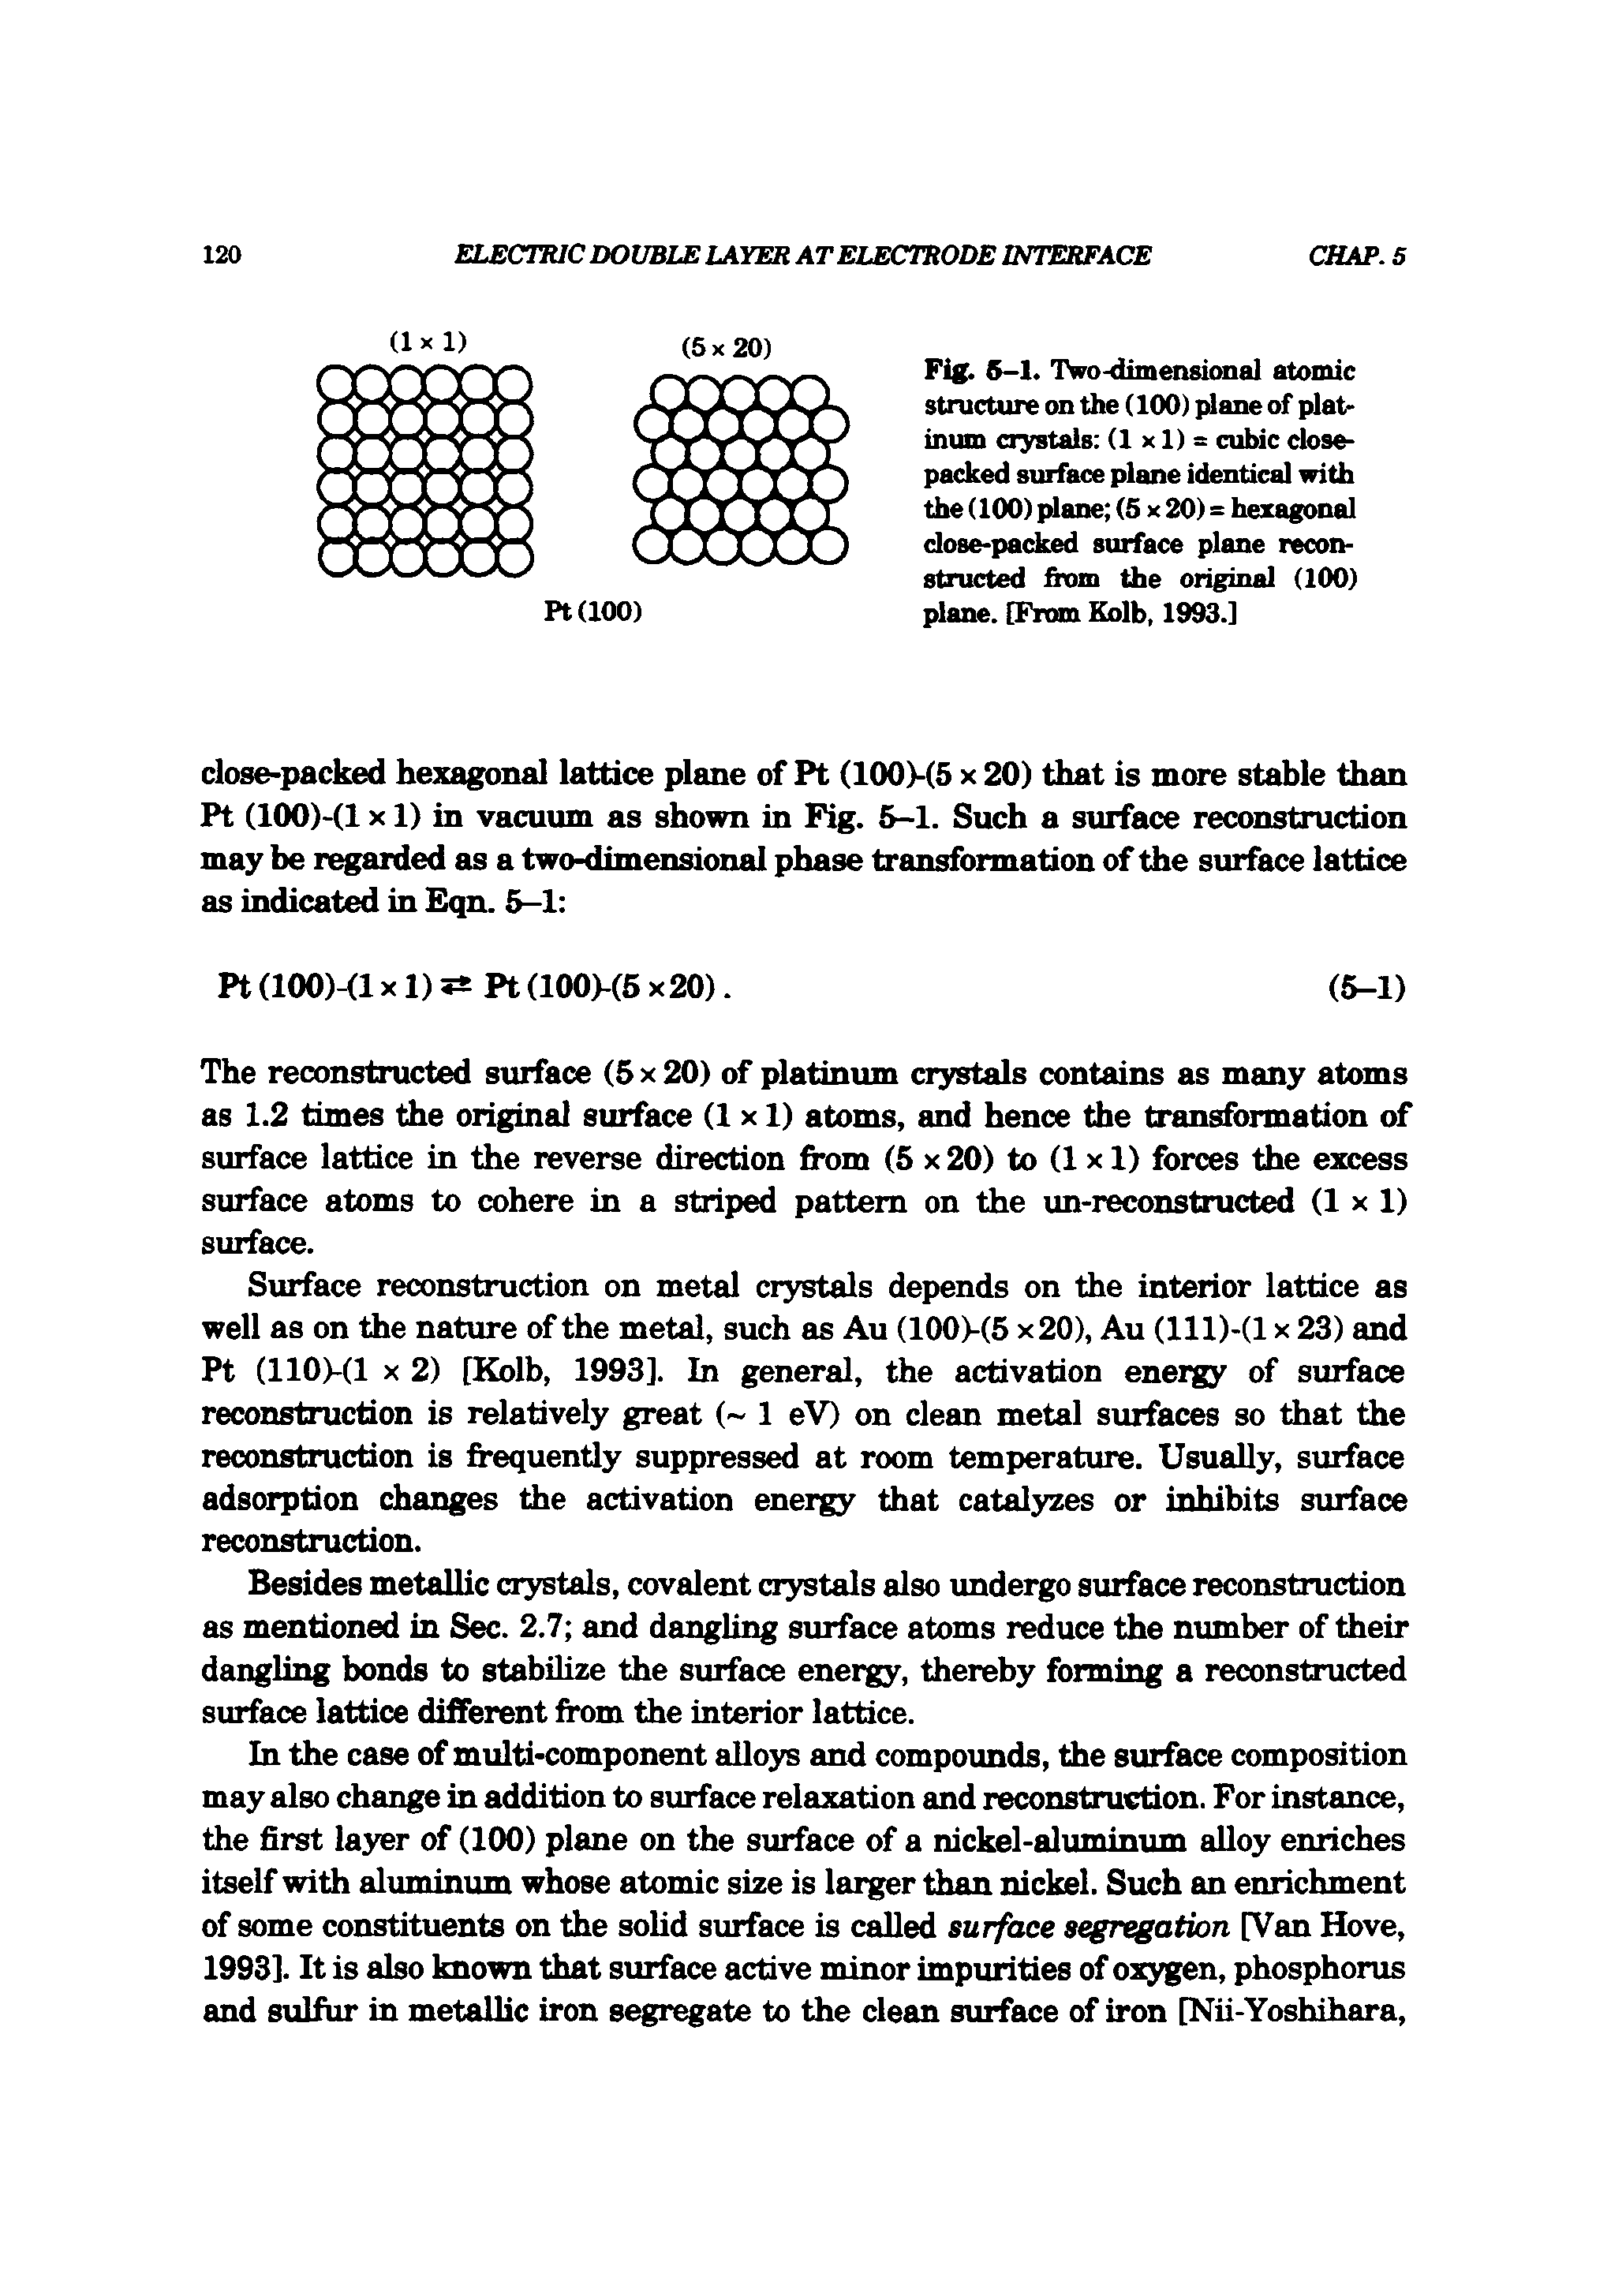 Fig. 6-1. TVo-dimensional atomic structure on the (100) plane of platinum crystals (1x1) = cubic close-packed surface plane identical with the (100) plane (5 x 20) = hexagonal dose-packed surface plane reconstructed finm the original (100) plane. [From Kolb, 1993.]...